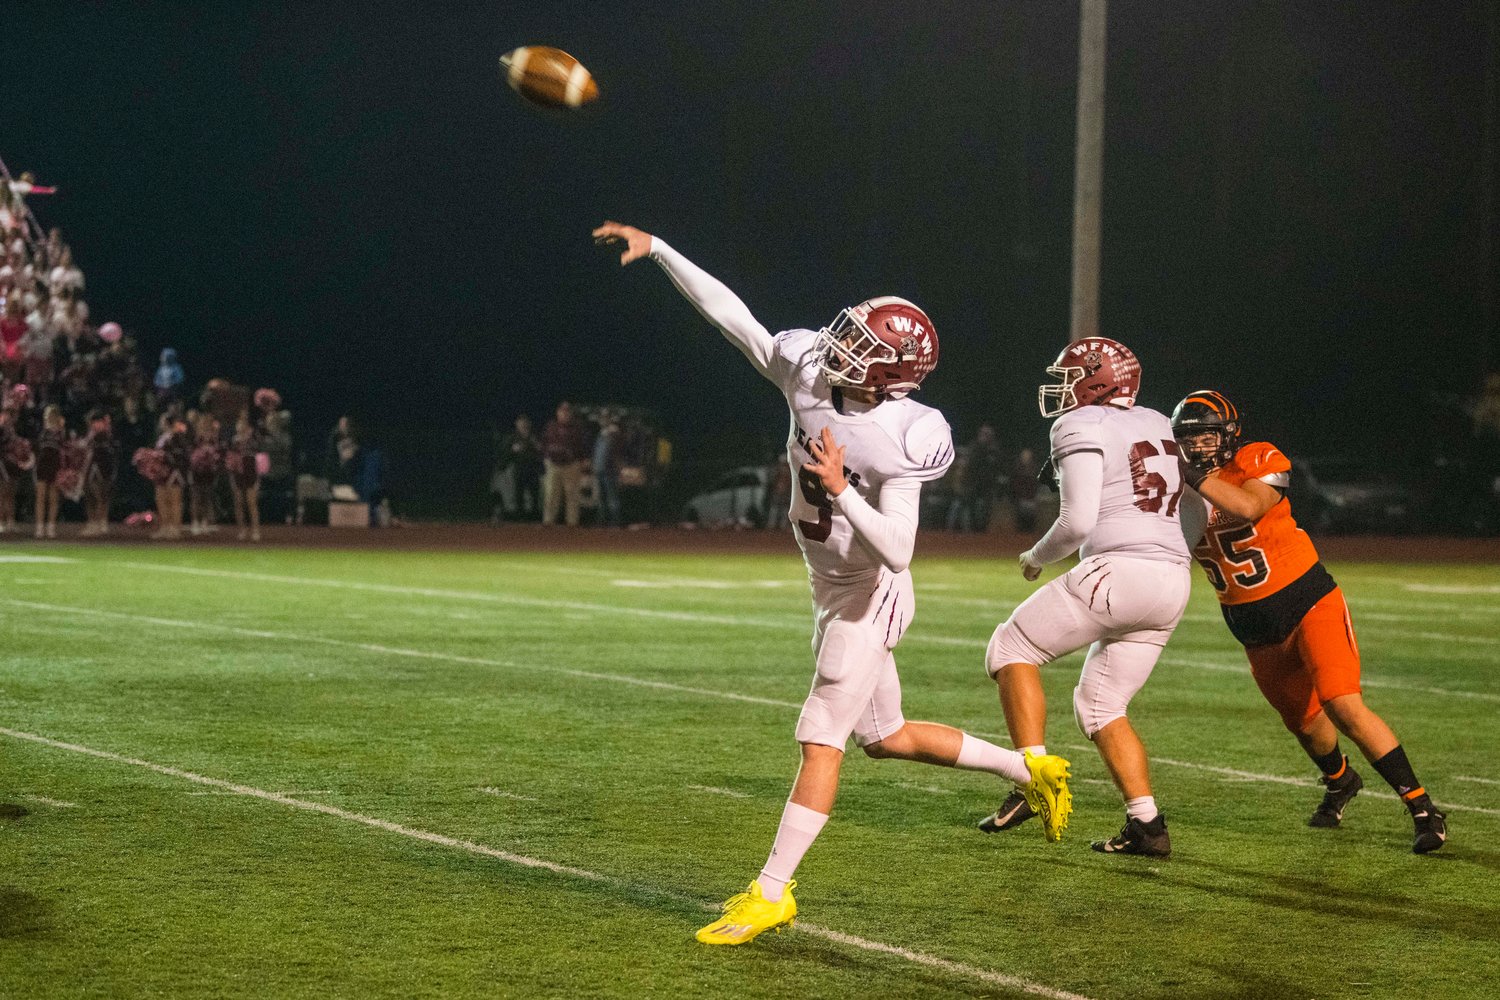 W.F. West senior Gavin Fugate (9) airs out a pass Friday night during a Swamp Cup rivalry game against Centralia at Tiger Stadium.